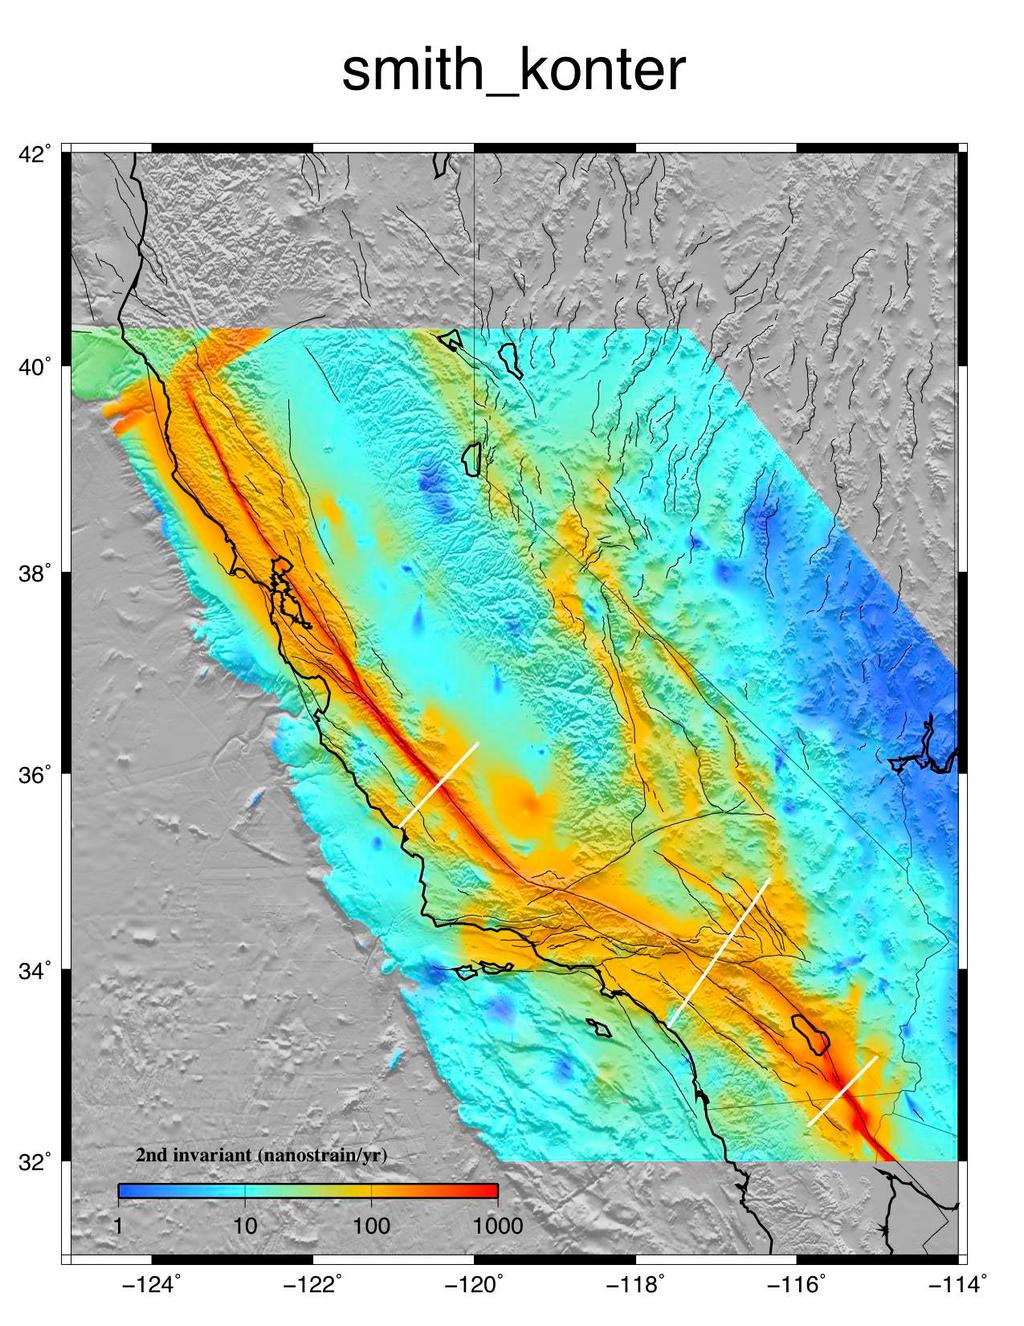 Strain rate derived from a dislocation model of the San Andreas Fault system [Smith-Konter and Sandwell, GRL, 2009]. 610 GPS velocity vectors were used to develop the model.